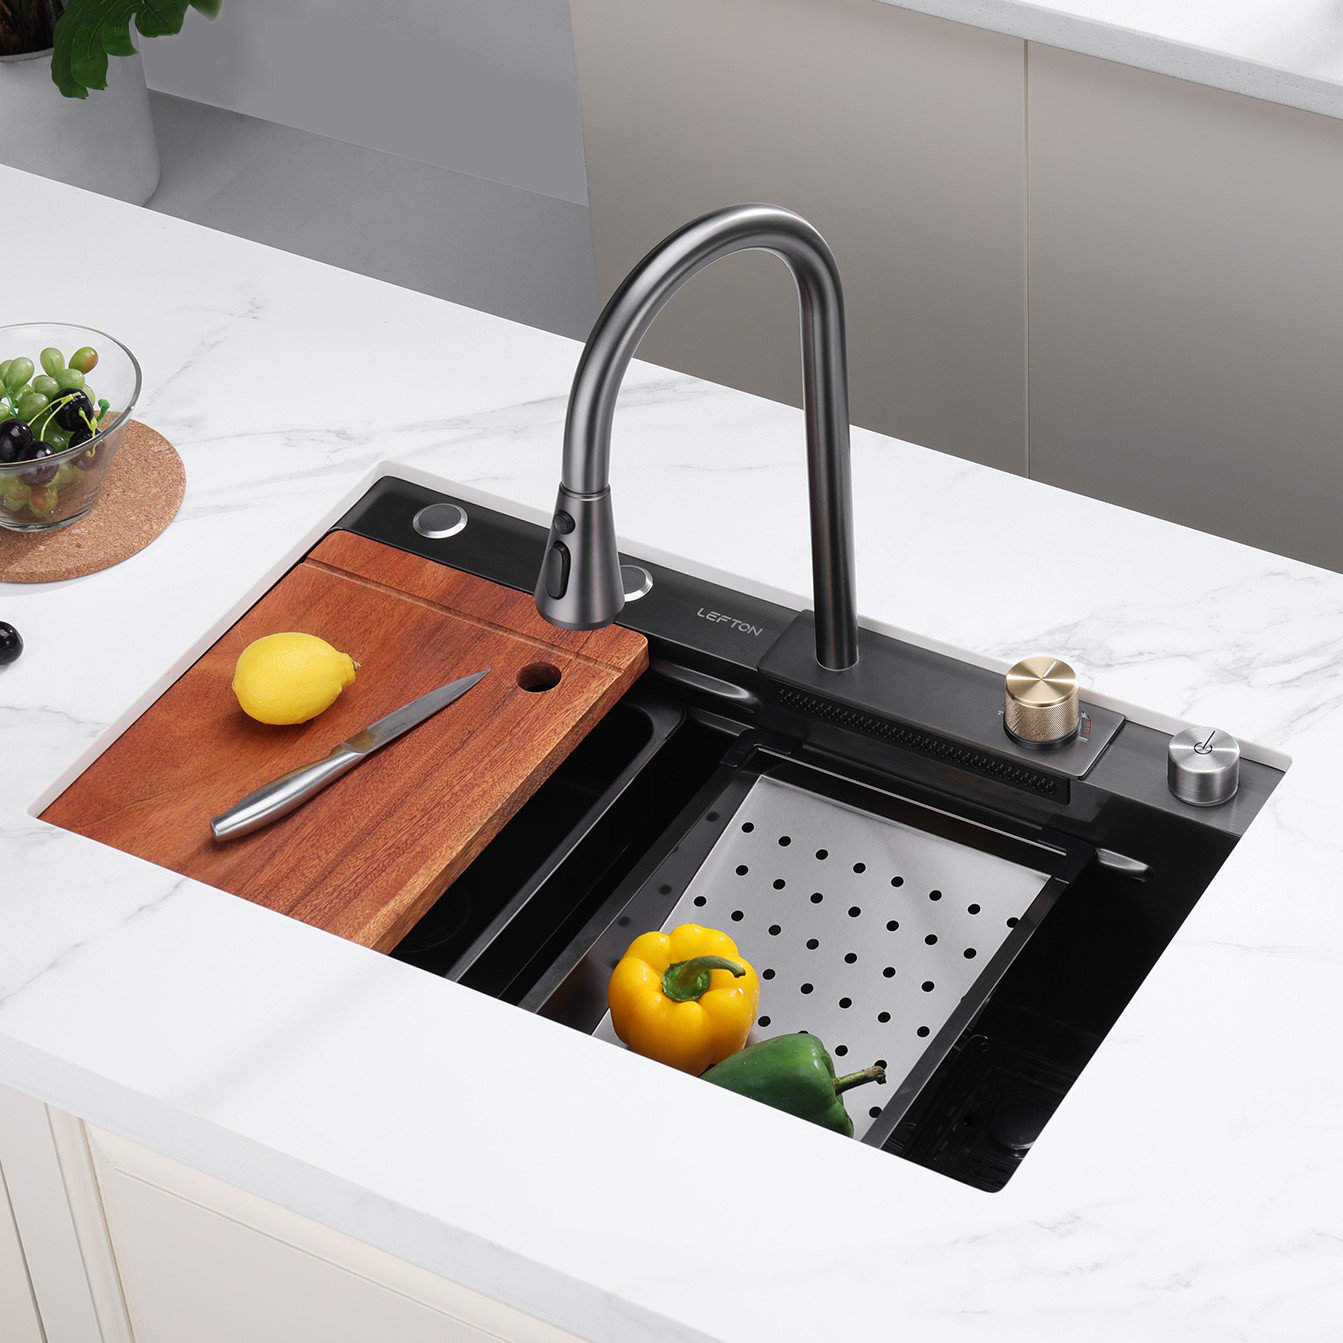 Lefton 304 Stainless Steel Waterfall Kitchen Sink Set with Pull-down  Faucet, Knife Holder, Drain Basket, Inside-Basin, and Cutting Board,  Temperature